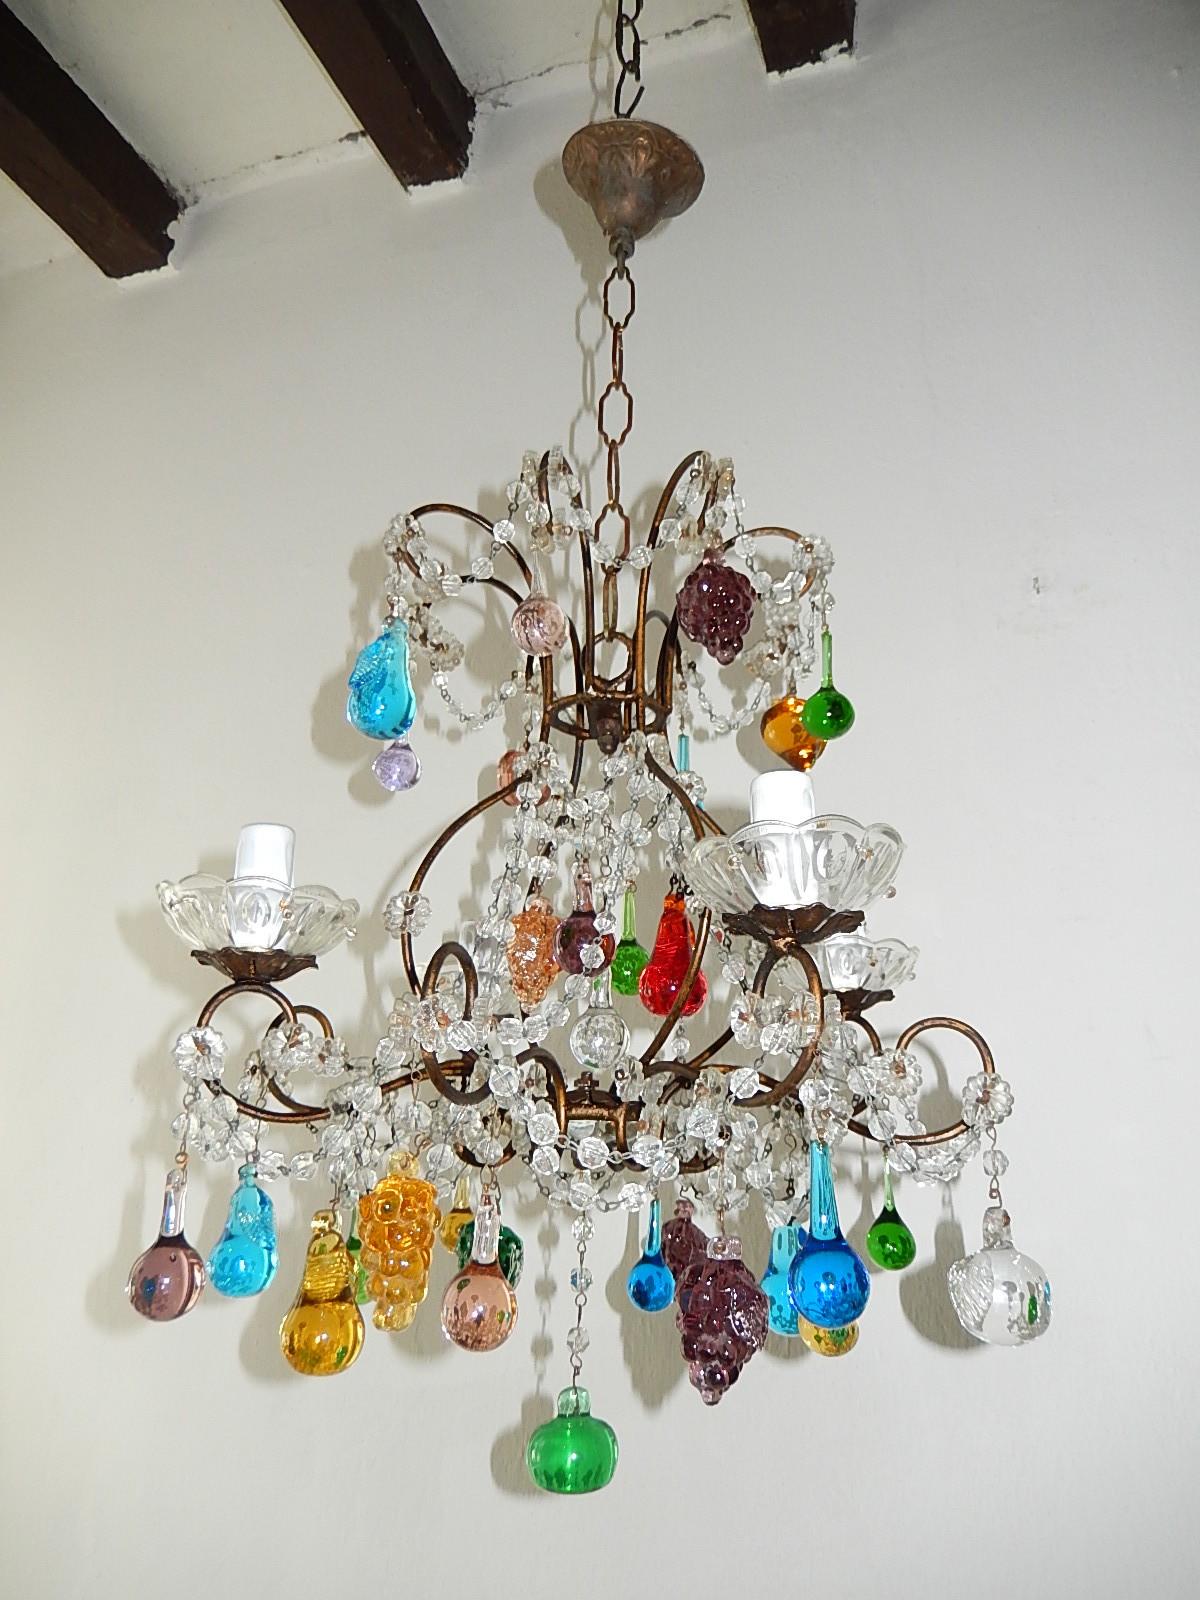 Housing 4 lights sitting in crystal bobèche. Swags of crystal and florets throughout with Murano fruit and drops. Adding 10 inches of original chain and canopy. Re-wired and ready to hang! Free UPS priority shipping from Italy.